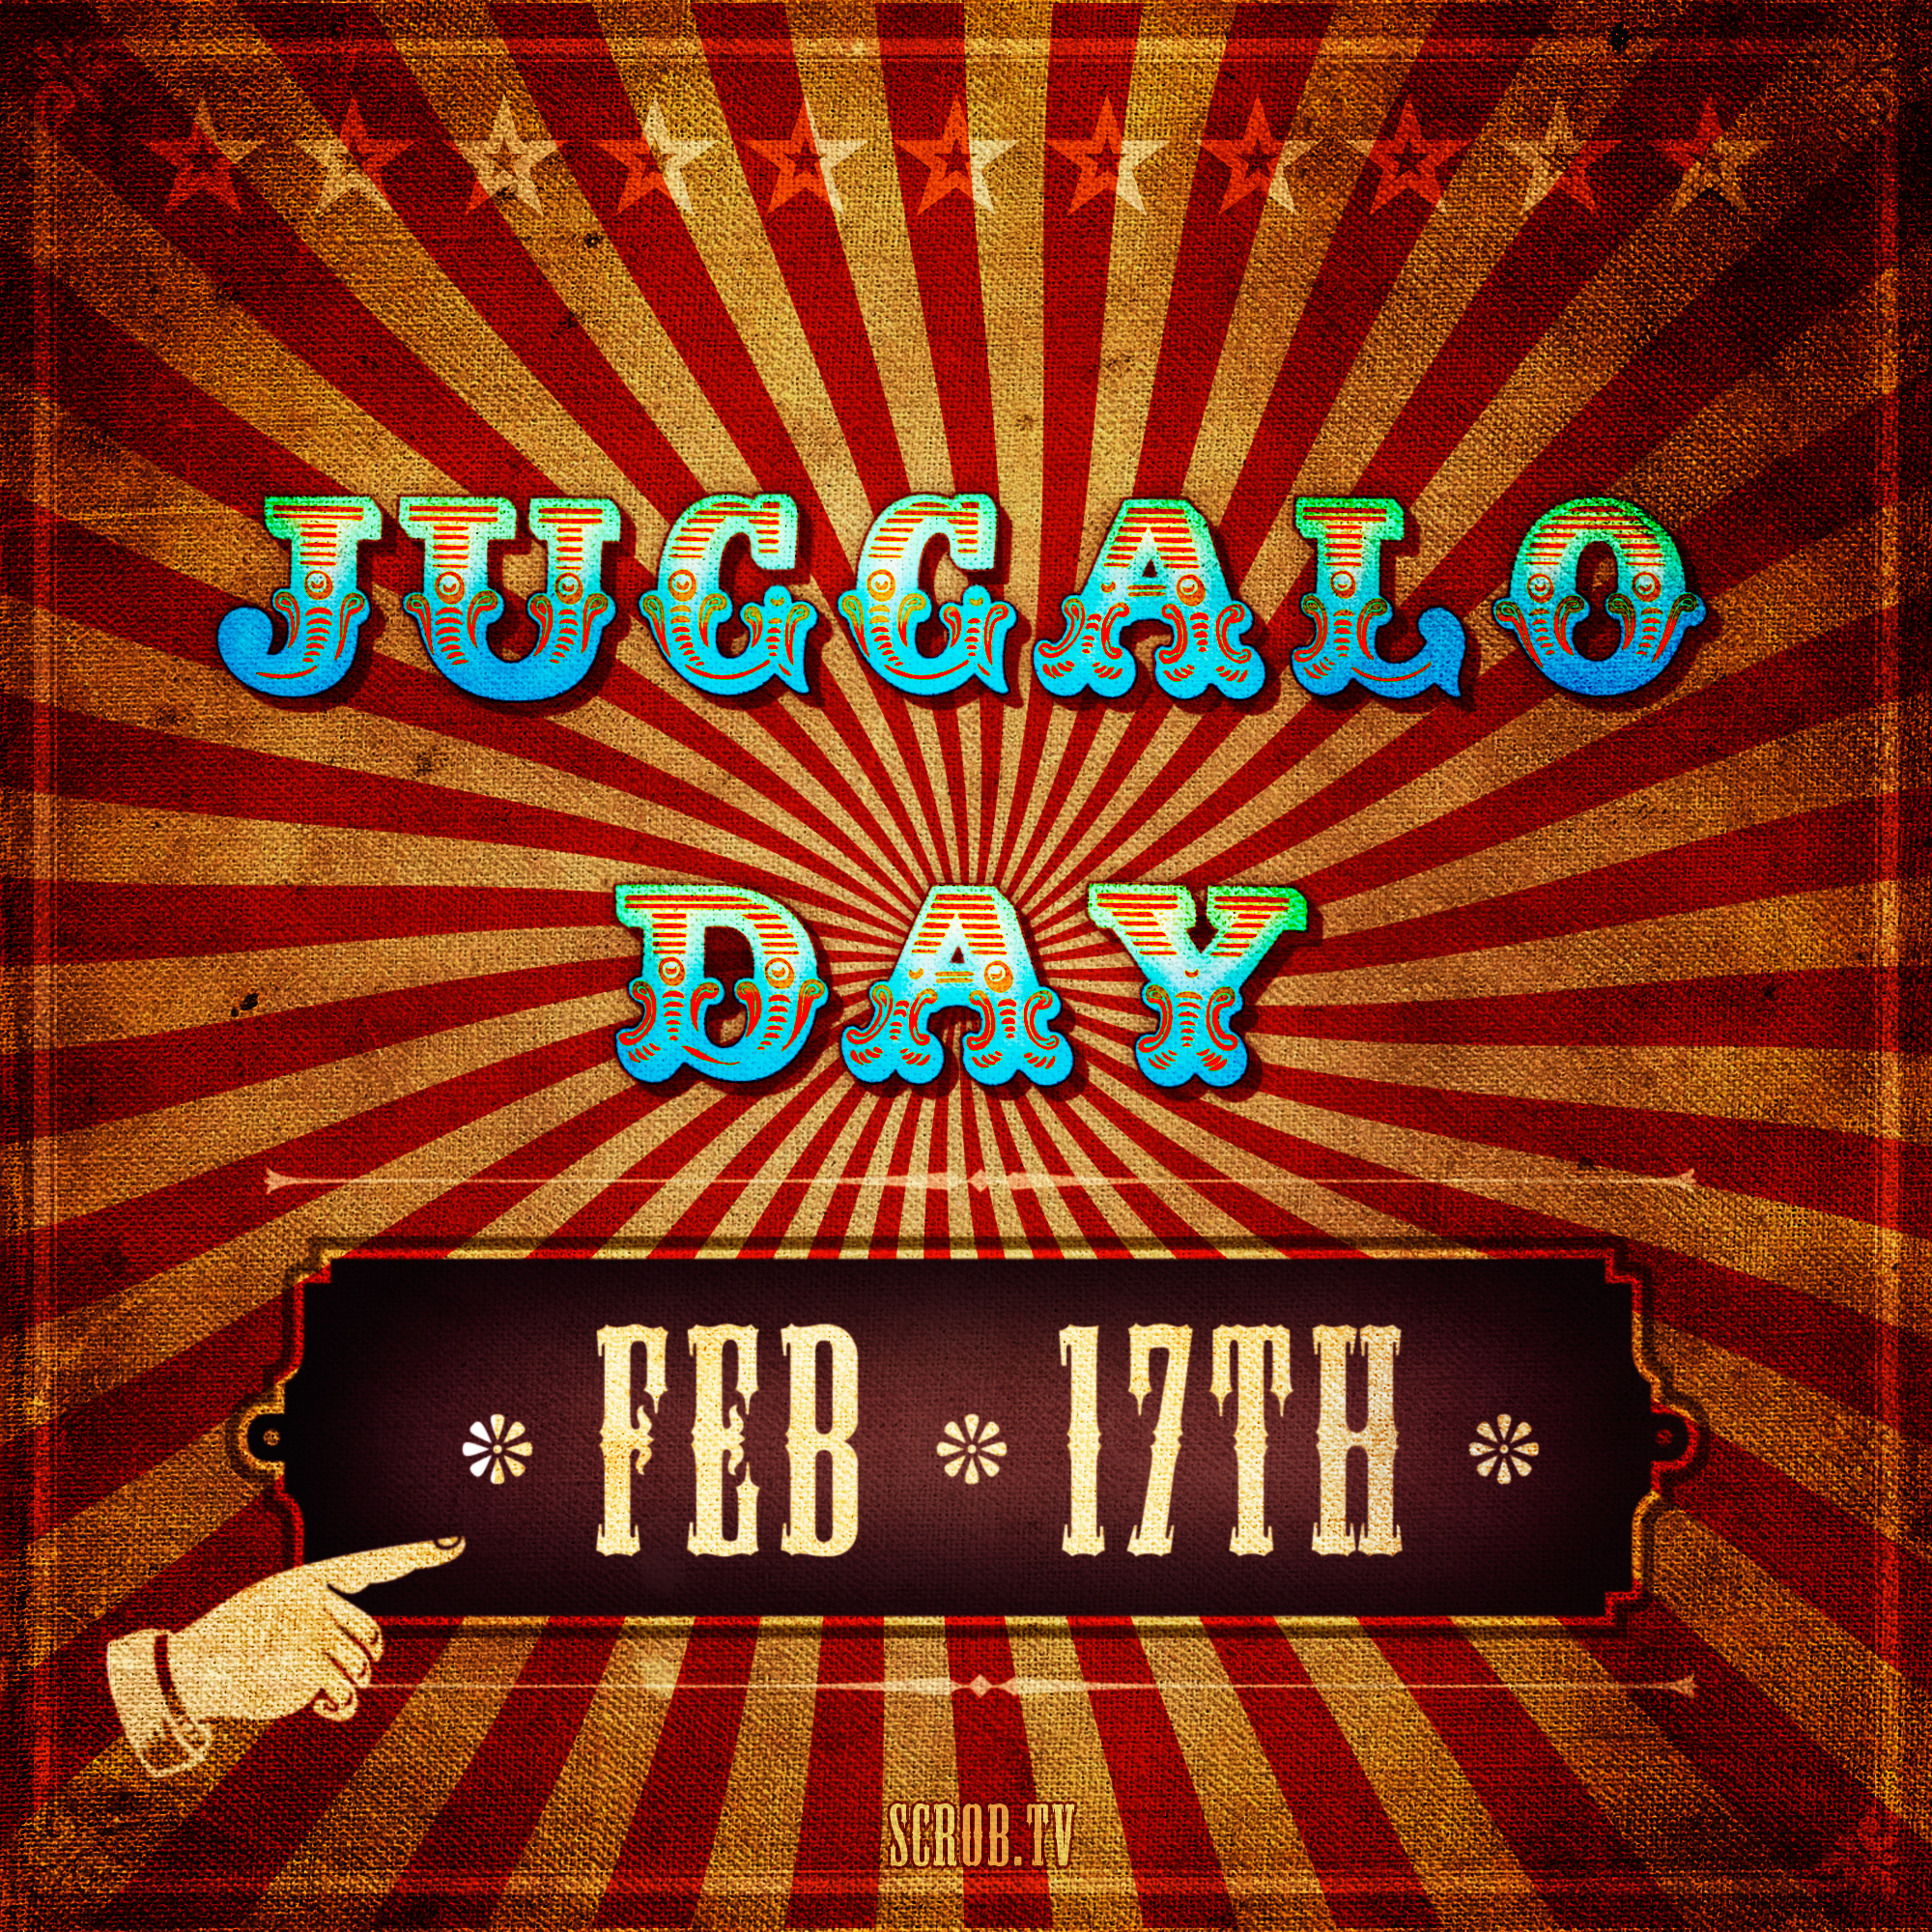 juggalo day